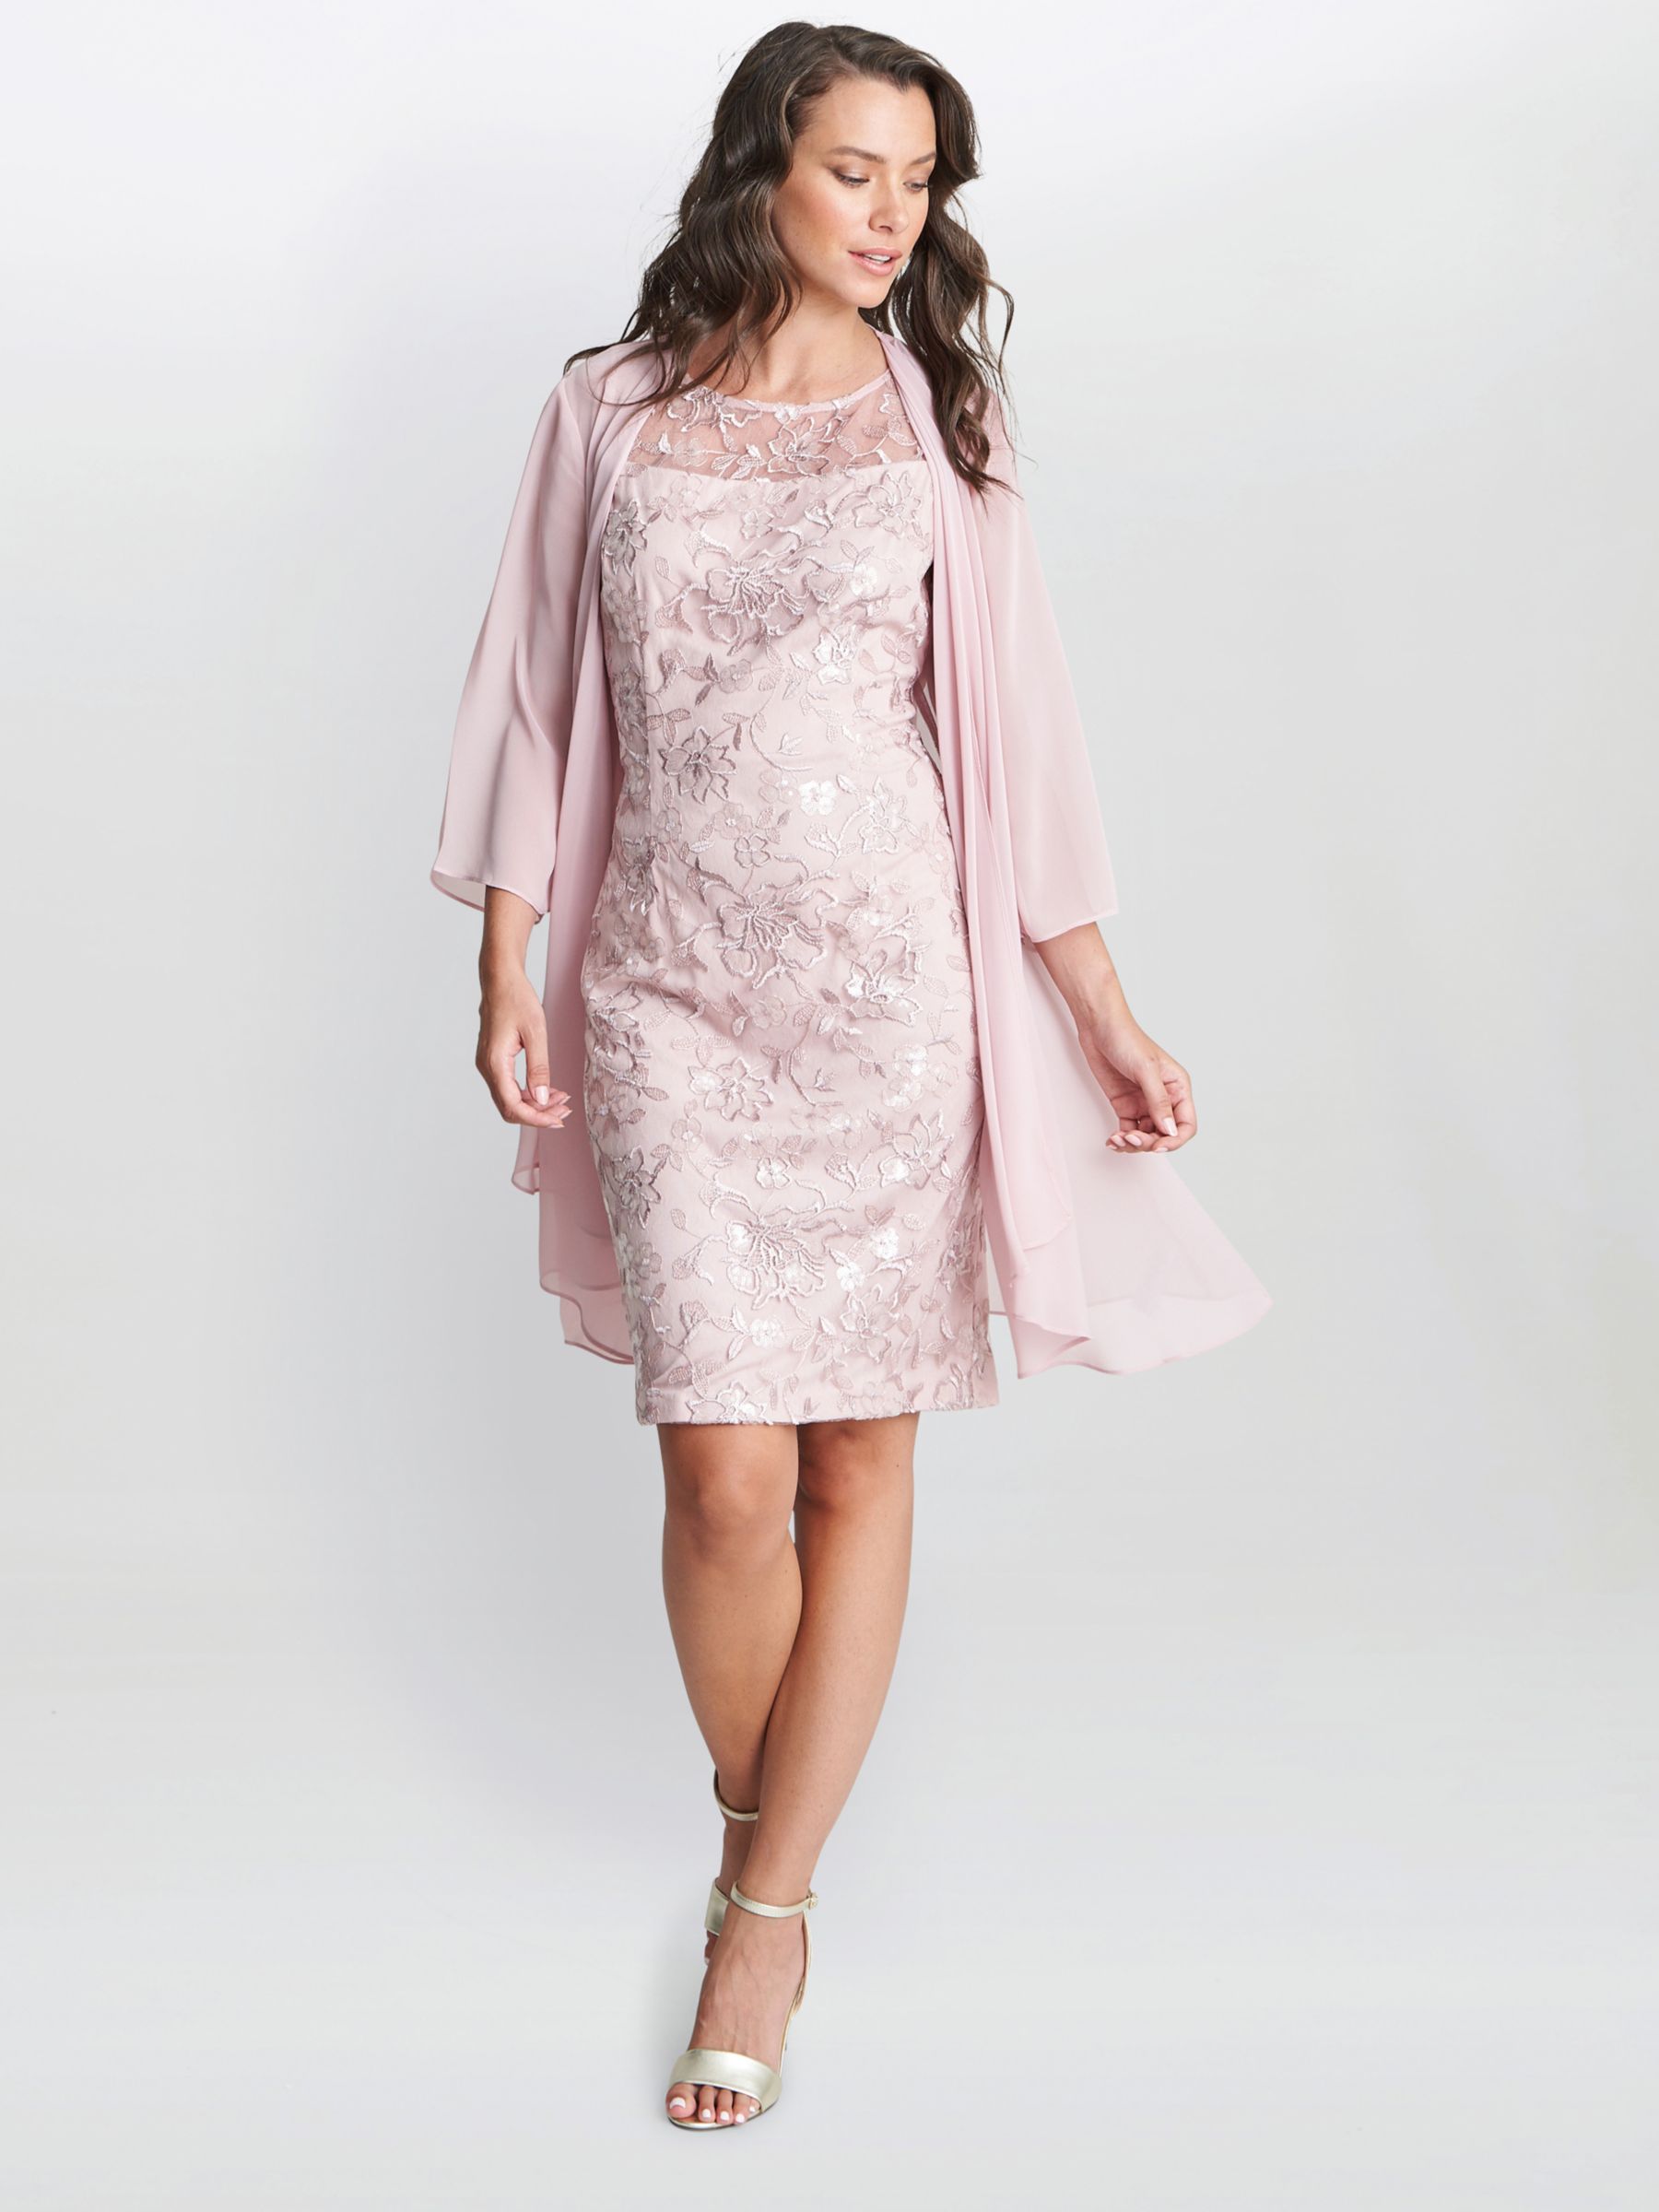 Gina Bacconi Hayley Embroidered Dress, Rose Pink, 8